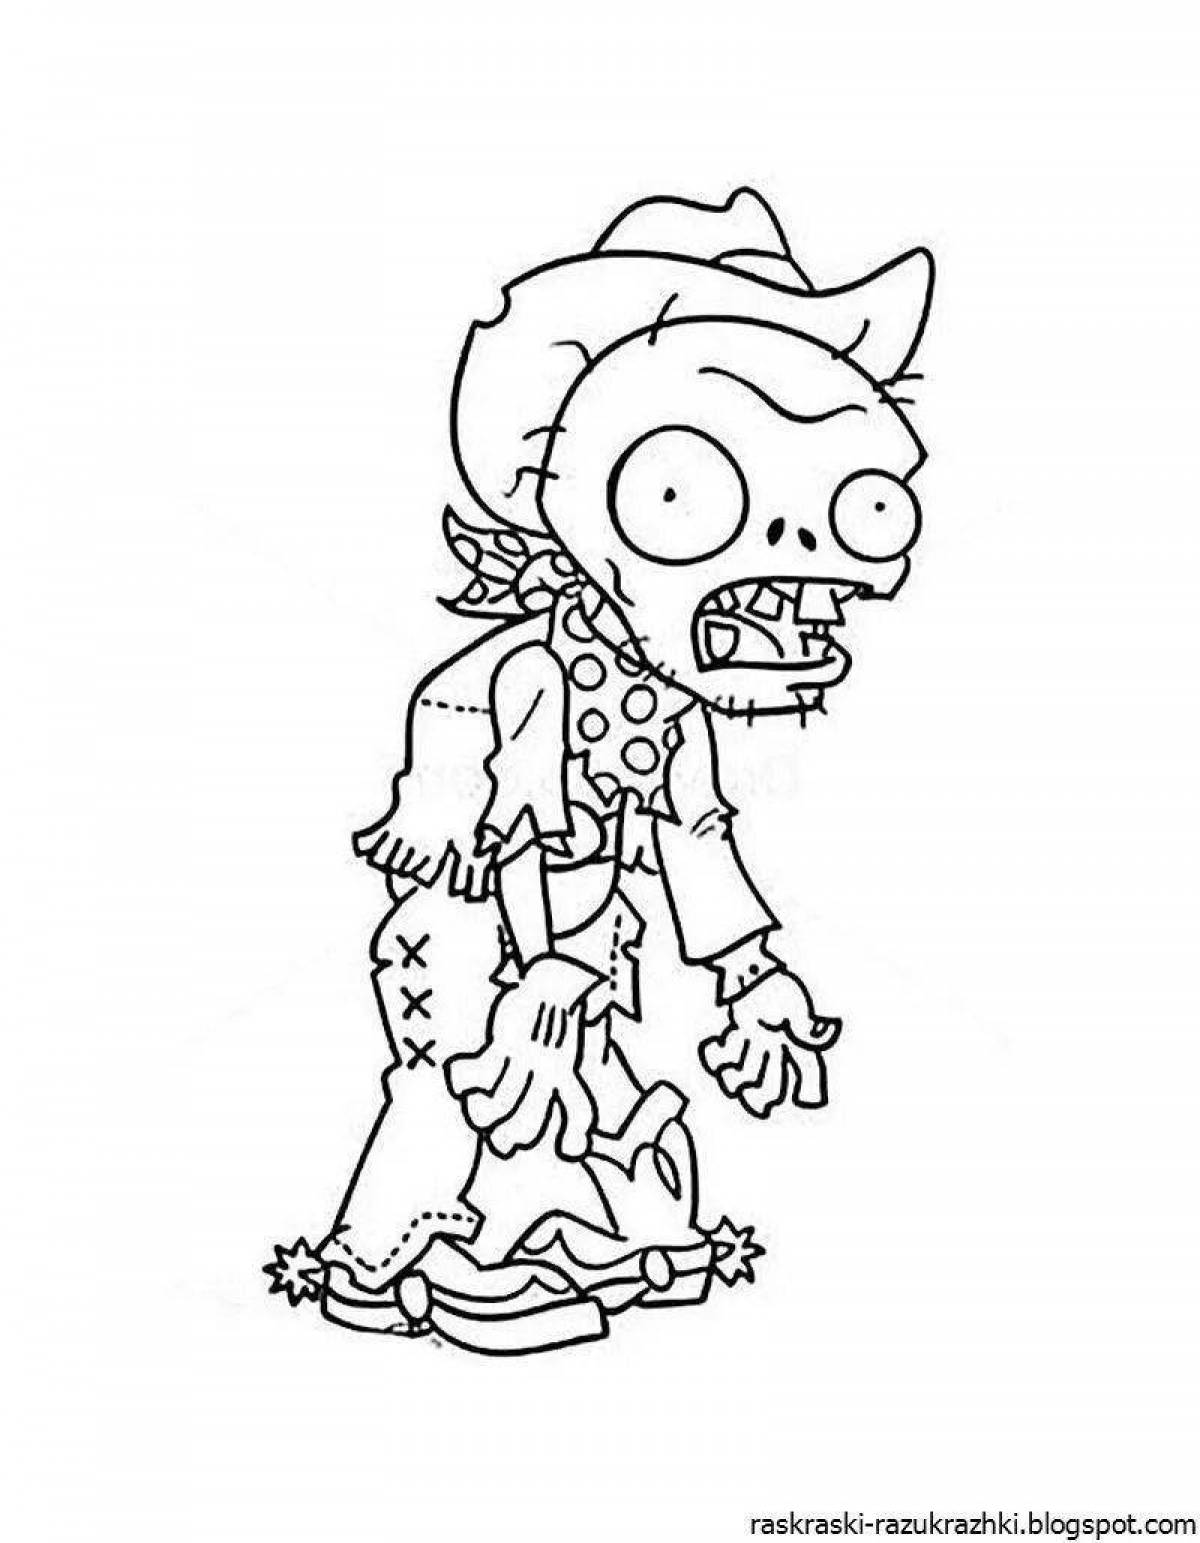 Chilling zombie coloring book for kids